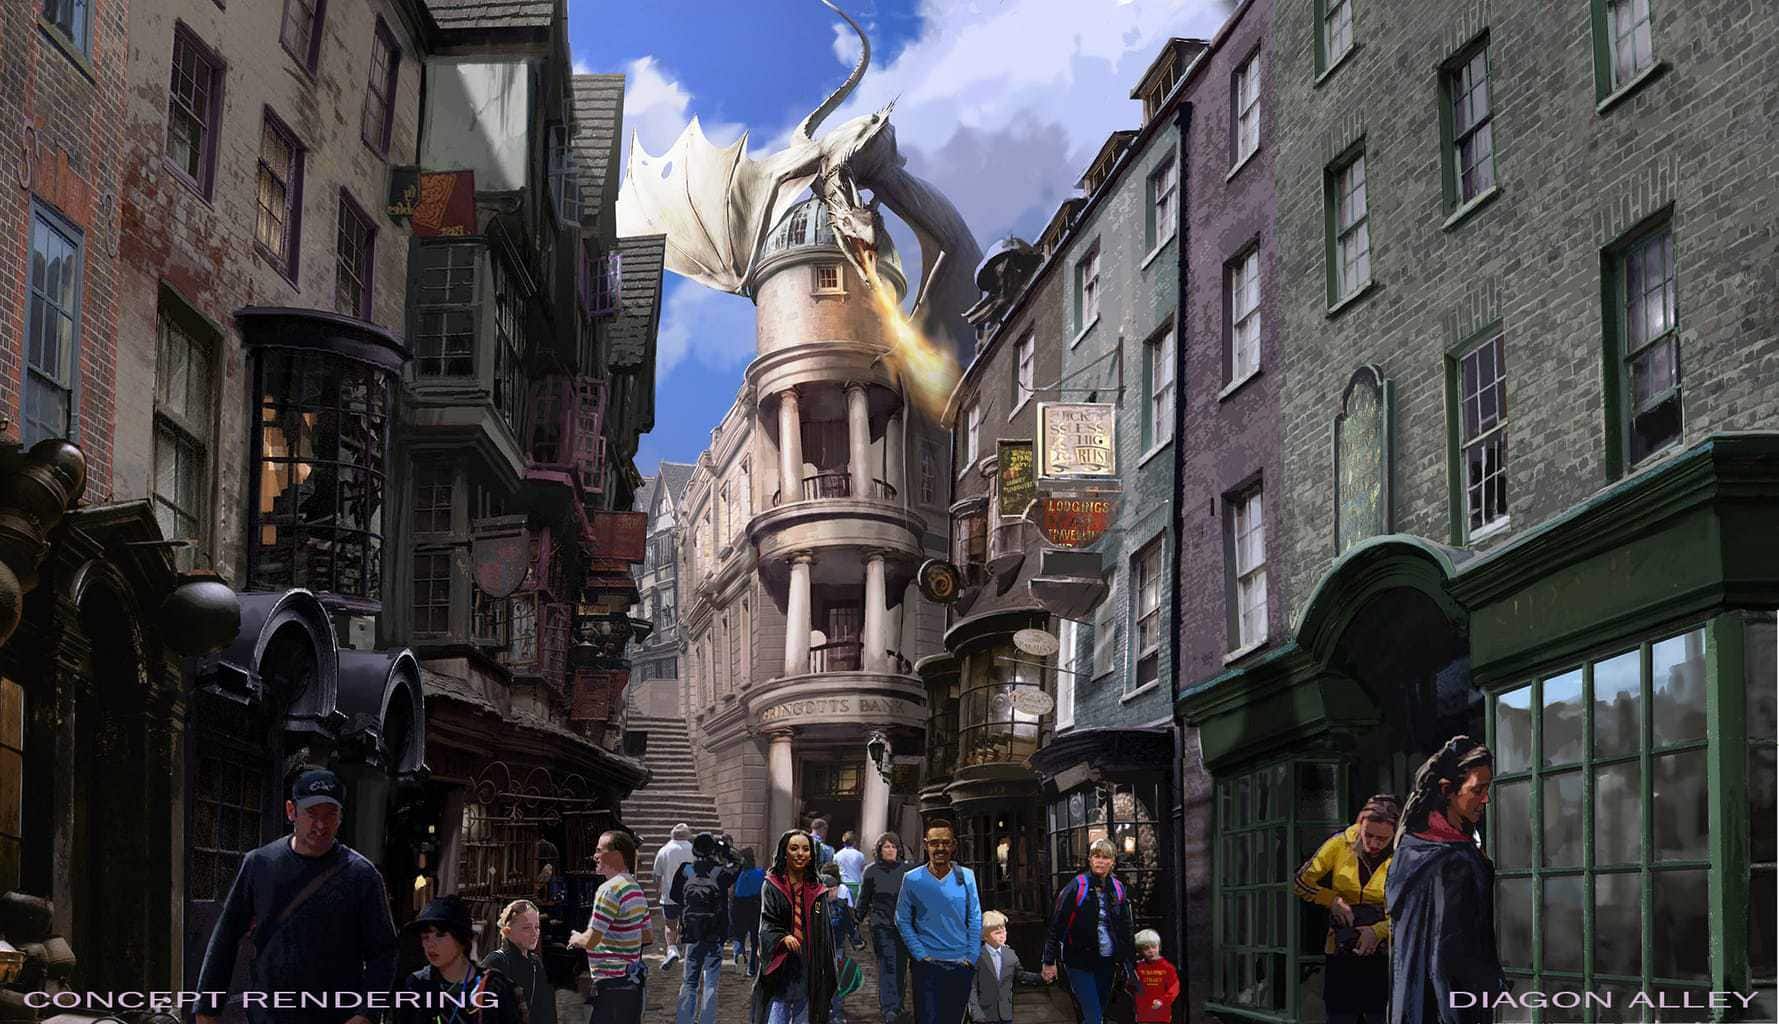 All New Diagon Alley at Wizarding World of Harry Potter